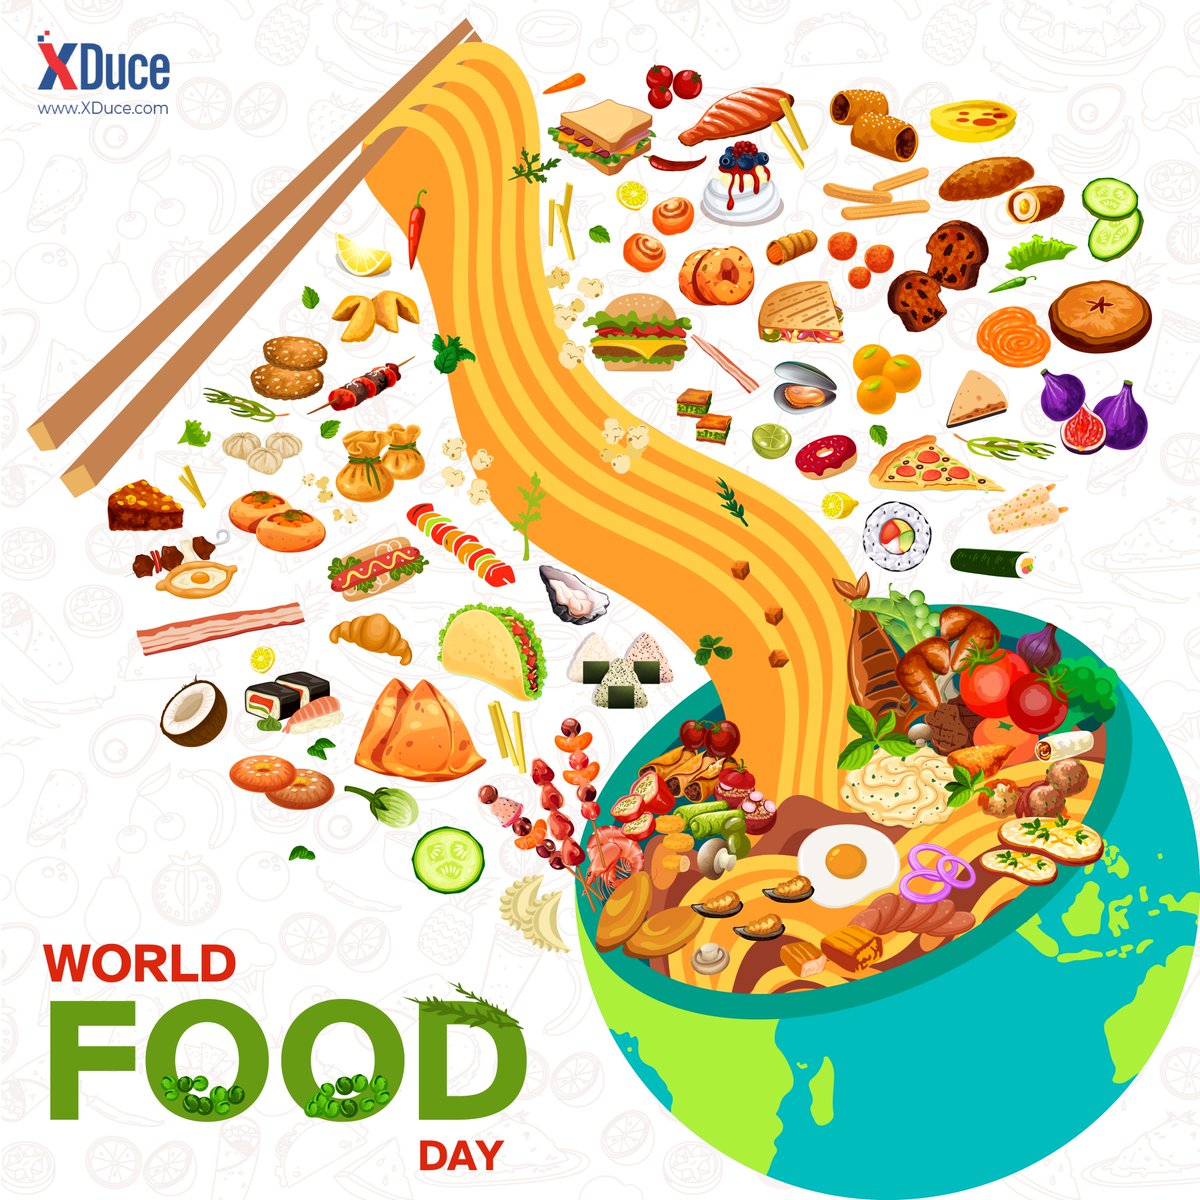 On Food Day, let's be grateful for the farmers, chefs, and all those who make our meals a daily delight. 🙏🍽️ 

#xduce #WorldFoodDay2023 #Gratitude  #FoodDayCelebration #worldcuisine #foodislife #TrendingNow